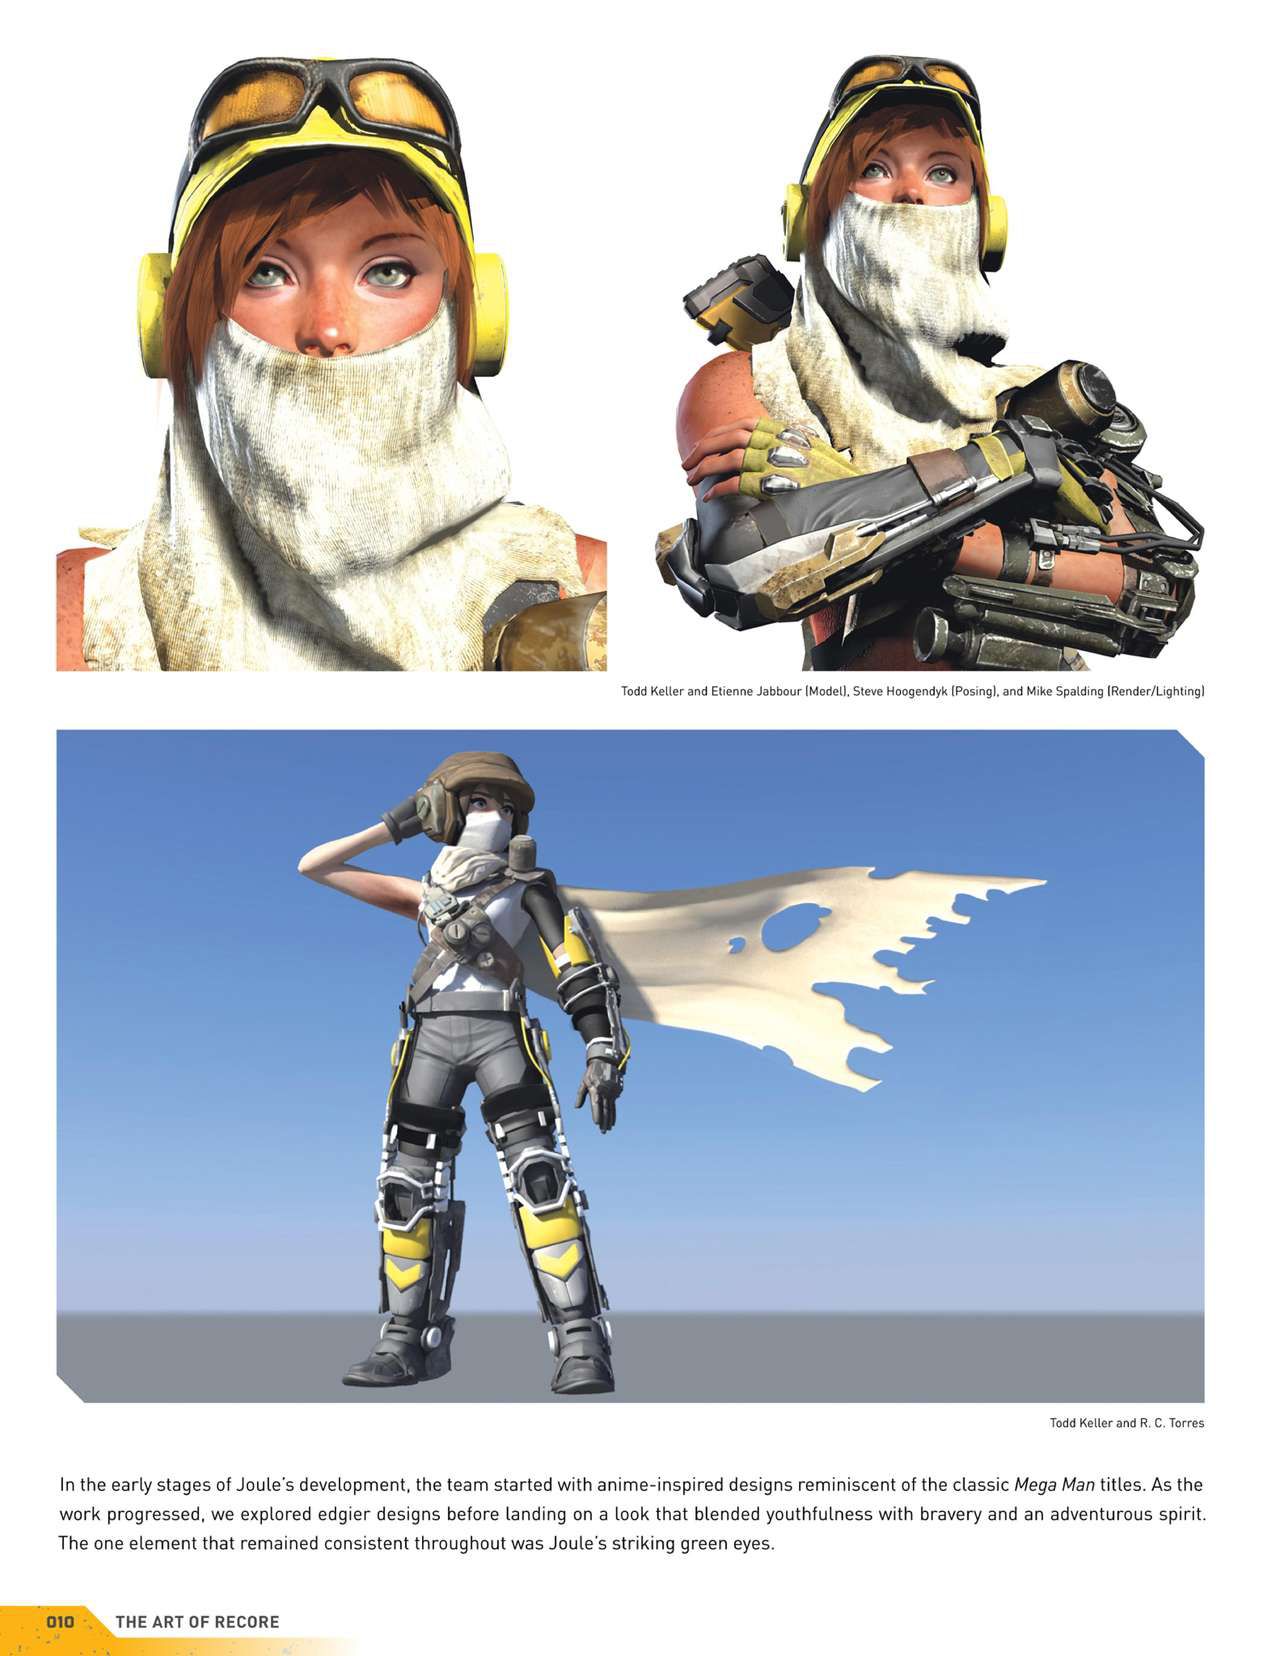 [Various] The Art of Recore 10